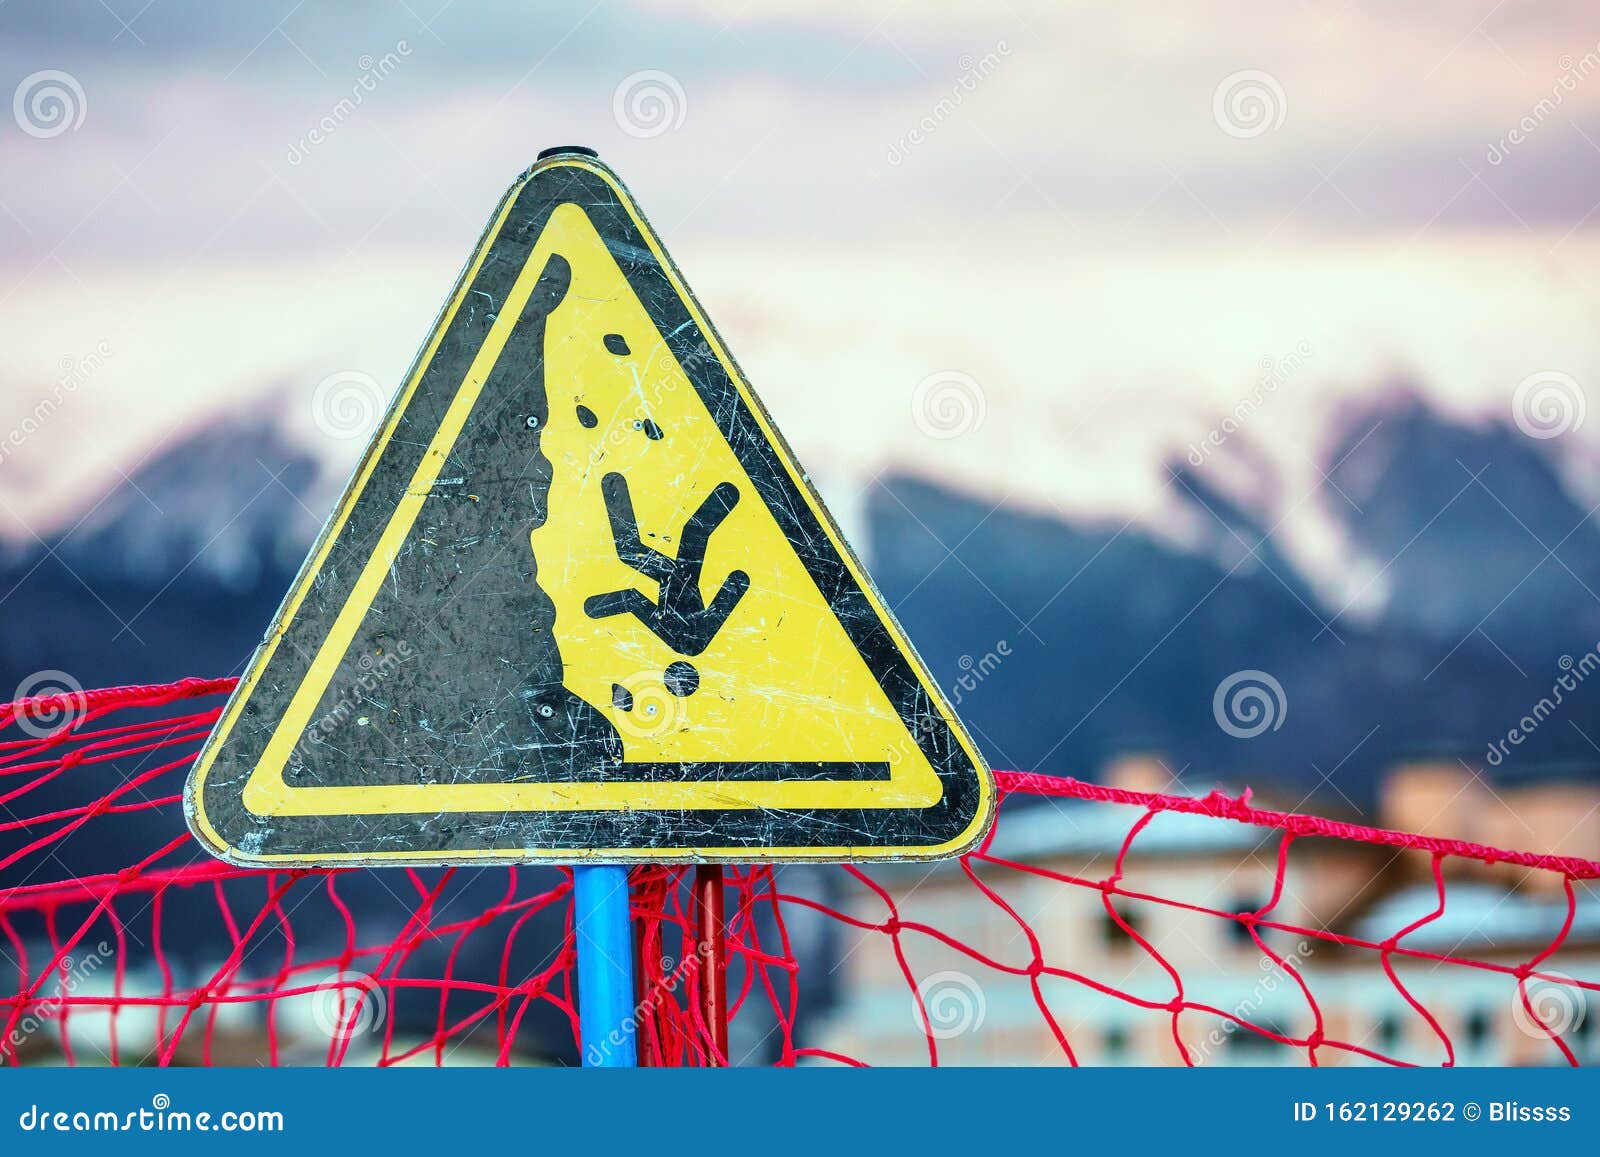 yellow triangle outdoor warning sign on snowy mountain peaks winter background displaying man falling down a steep as safety peril